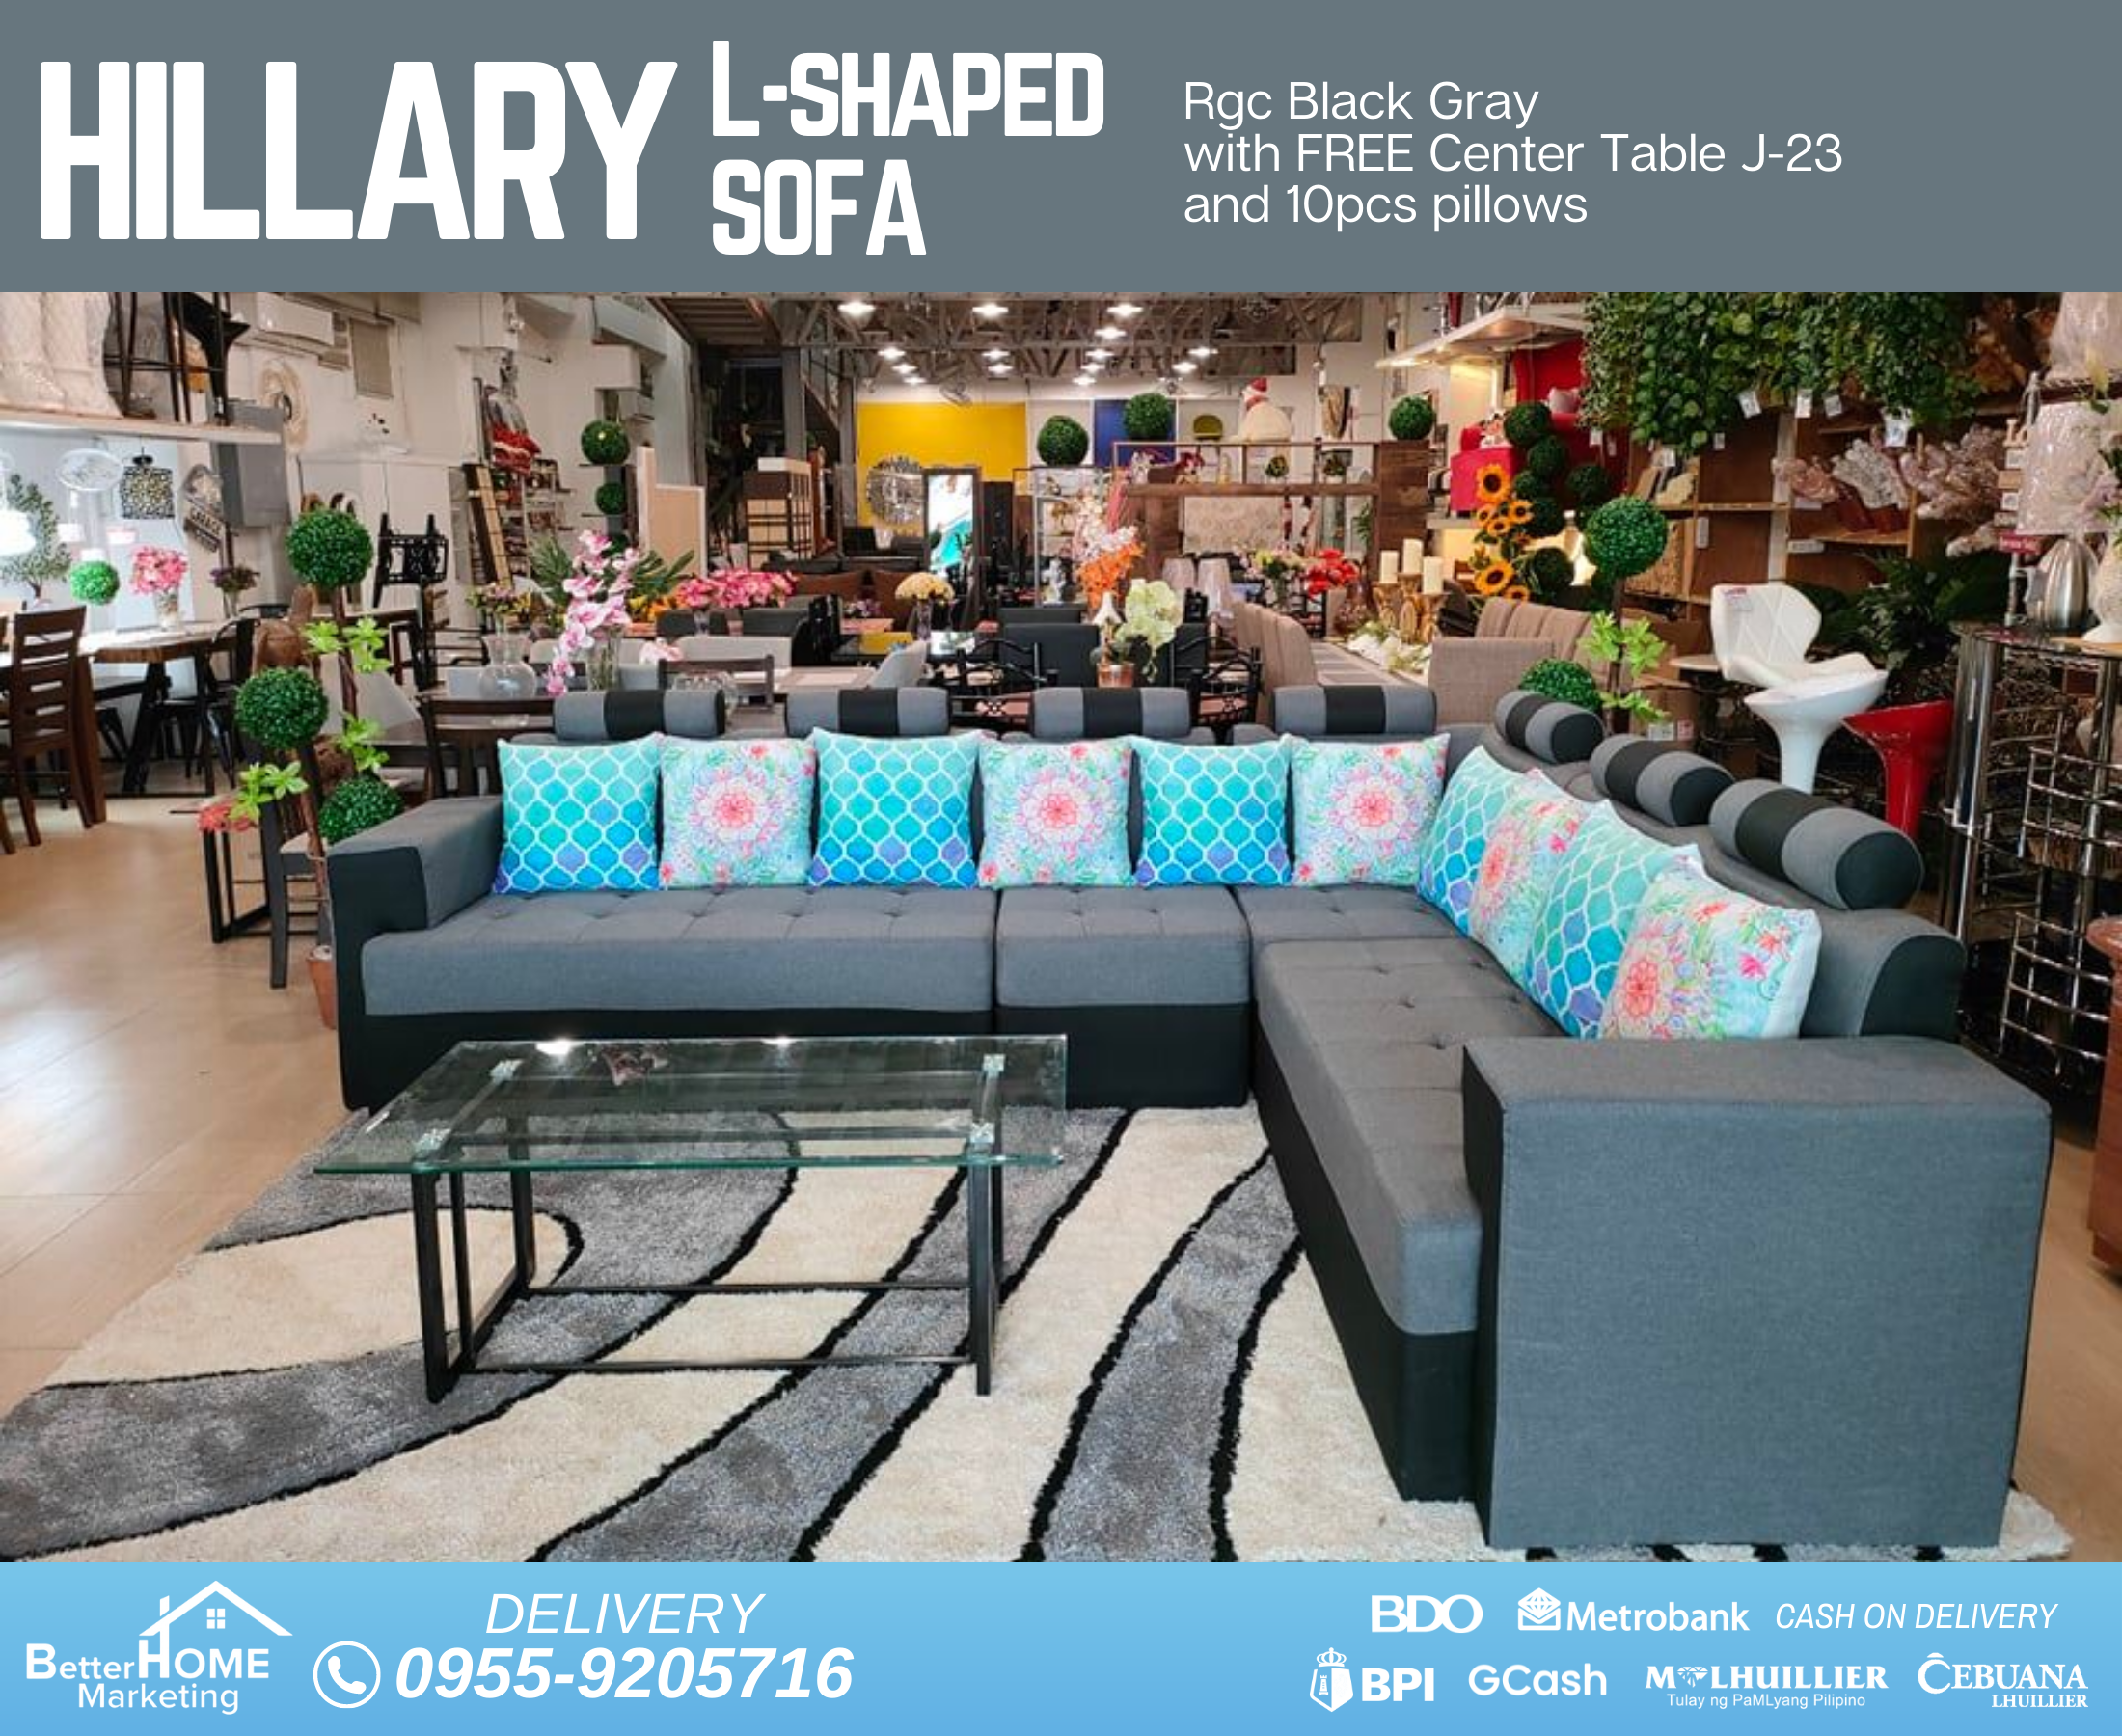 Hillary L-Shaped Sofa RGC Black Gray with FREE Center Table J-23 and 10pcs pillows